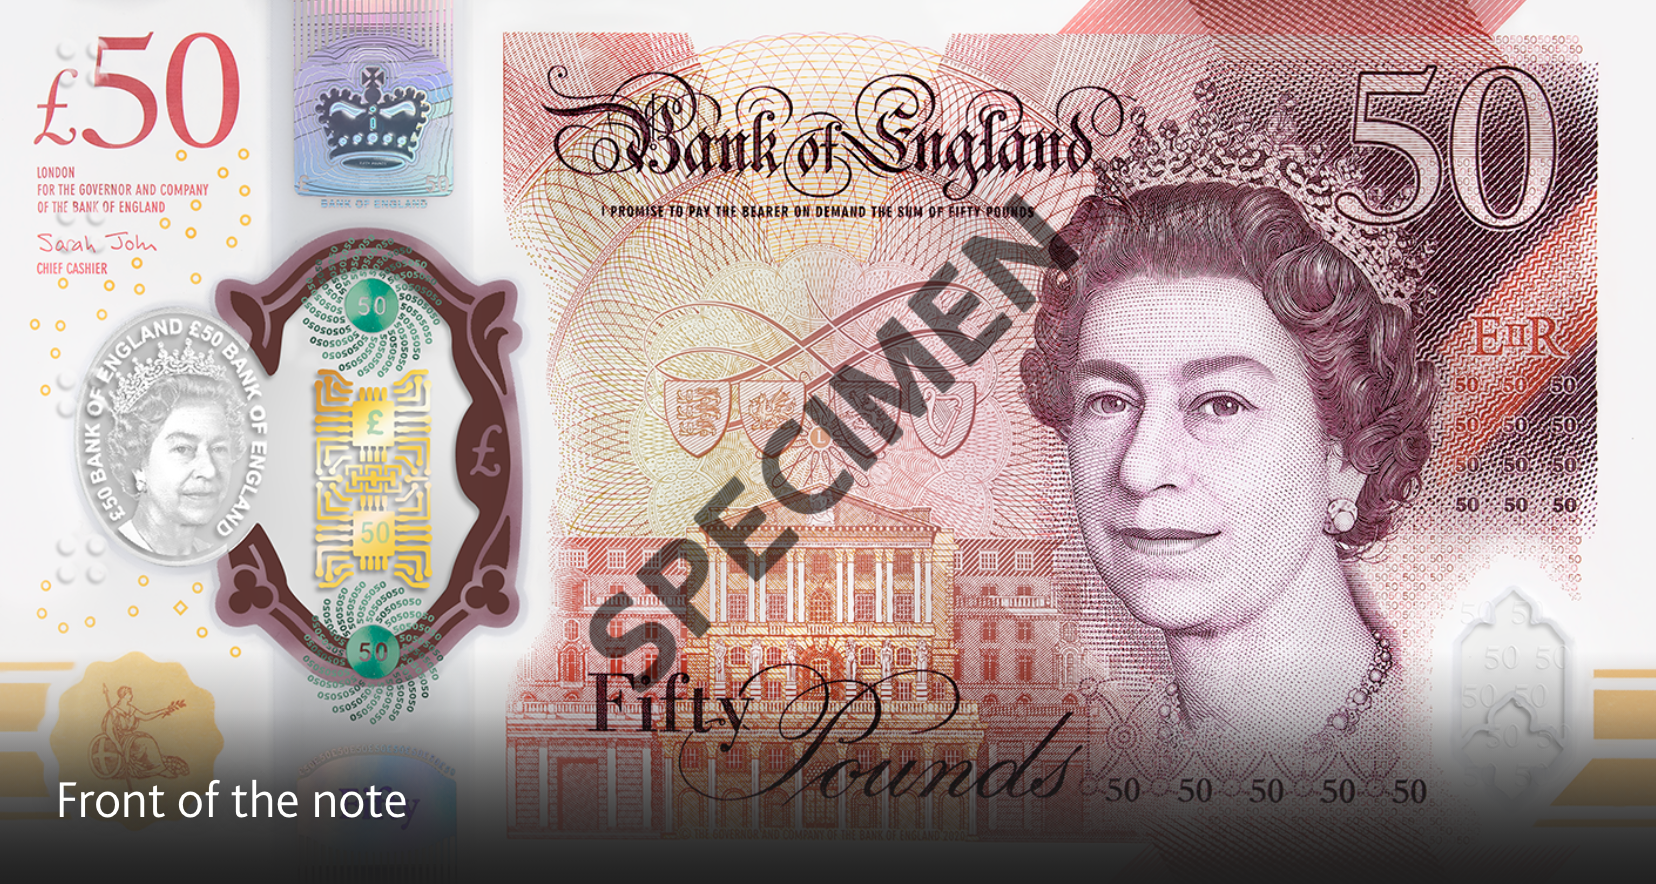 The UK introduces new GBP 50 note featuring codebreaker Alan Turing. Here’s a closer look at its details